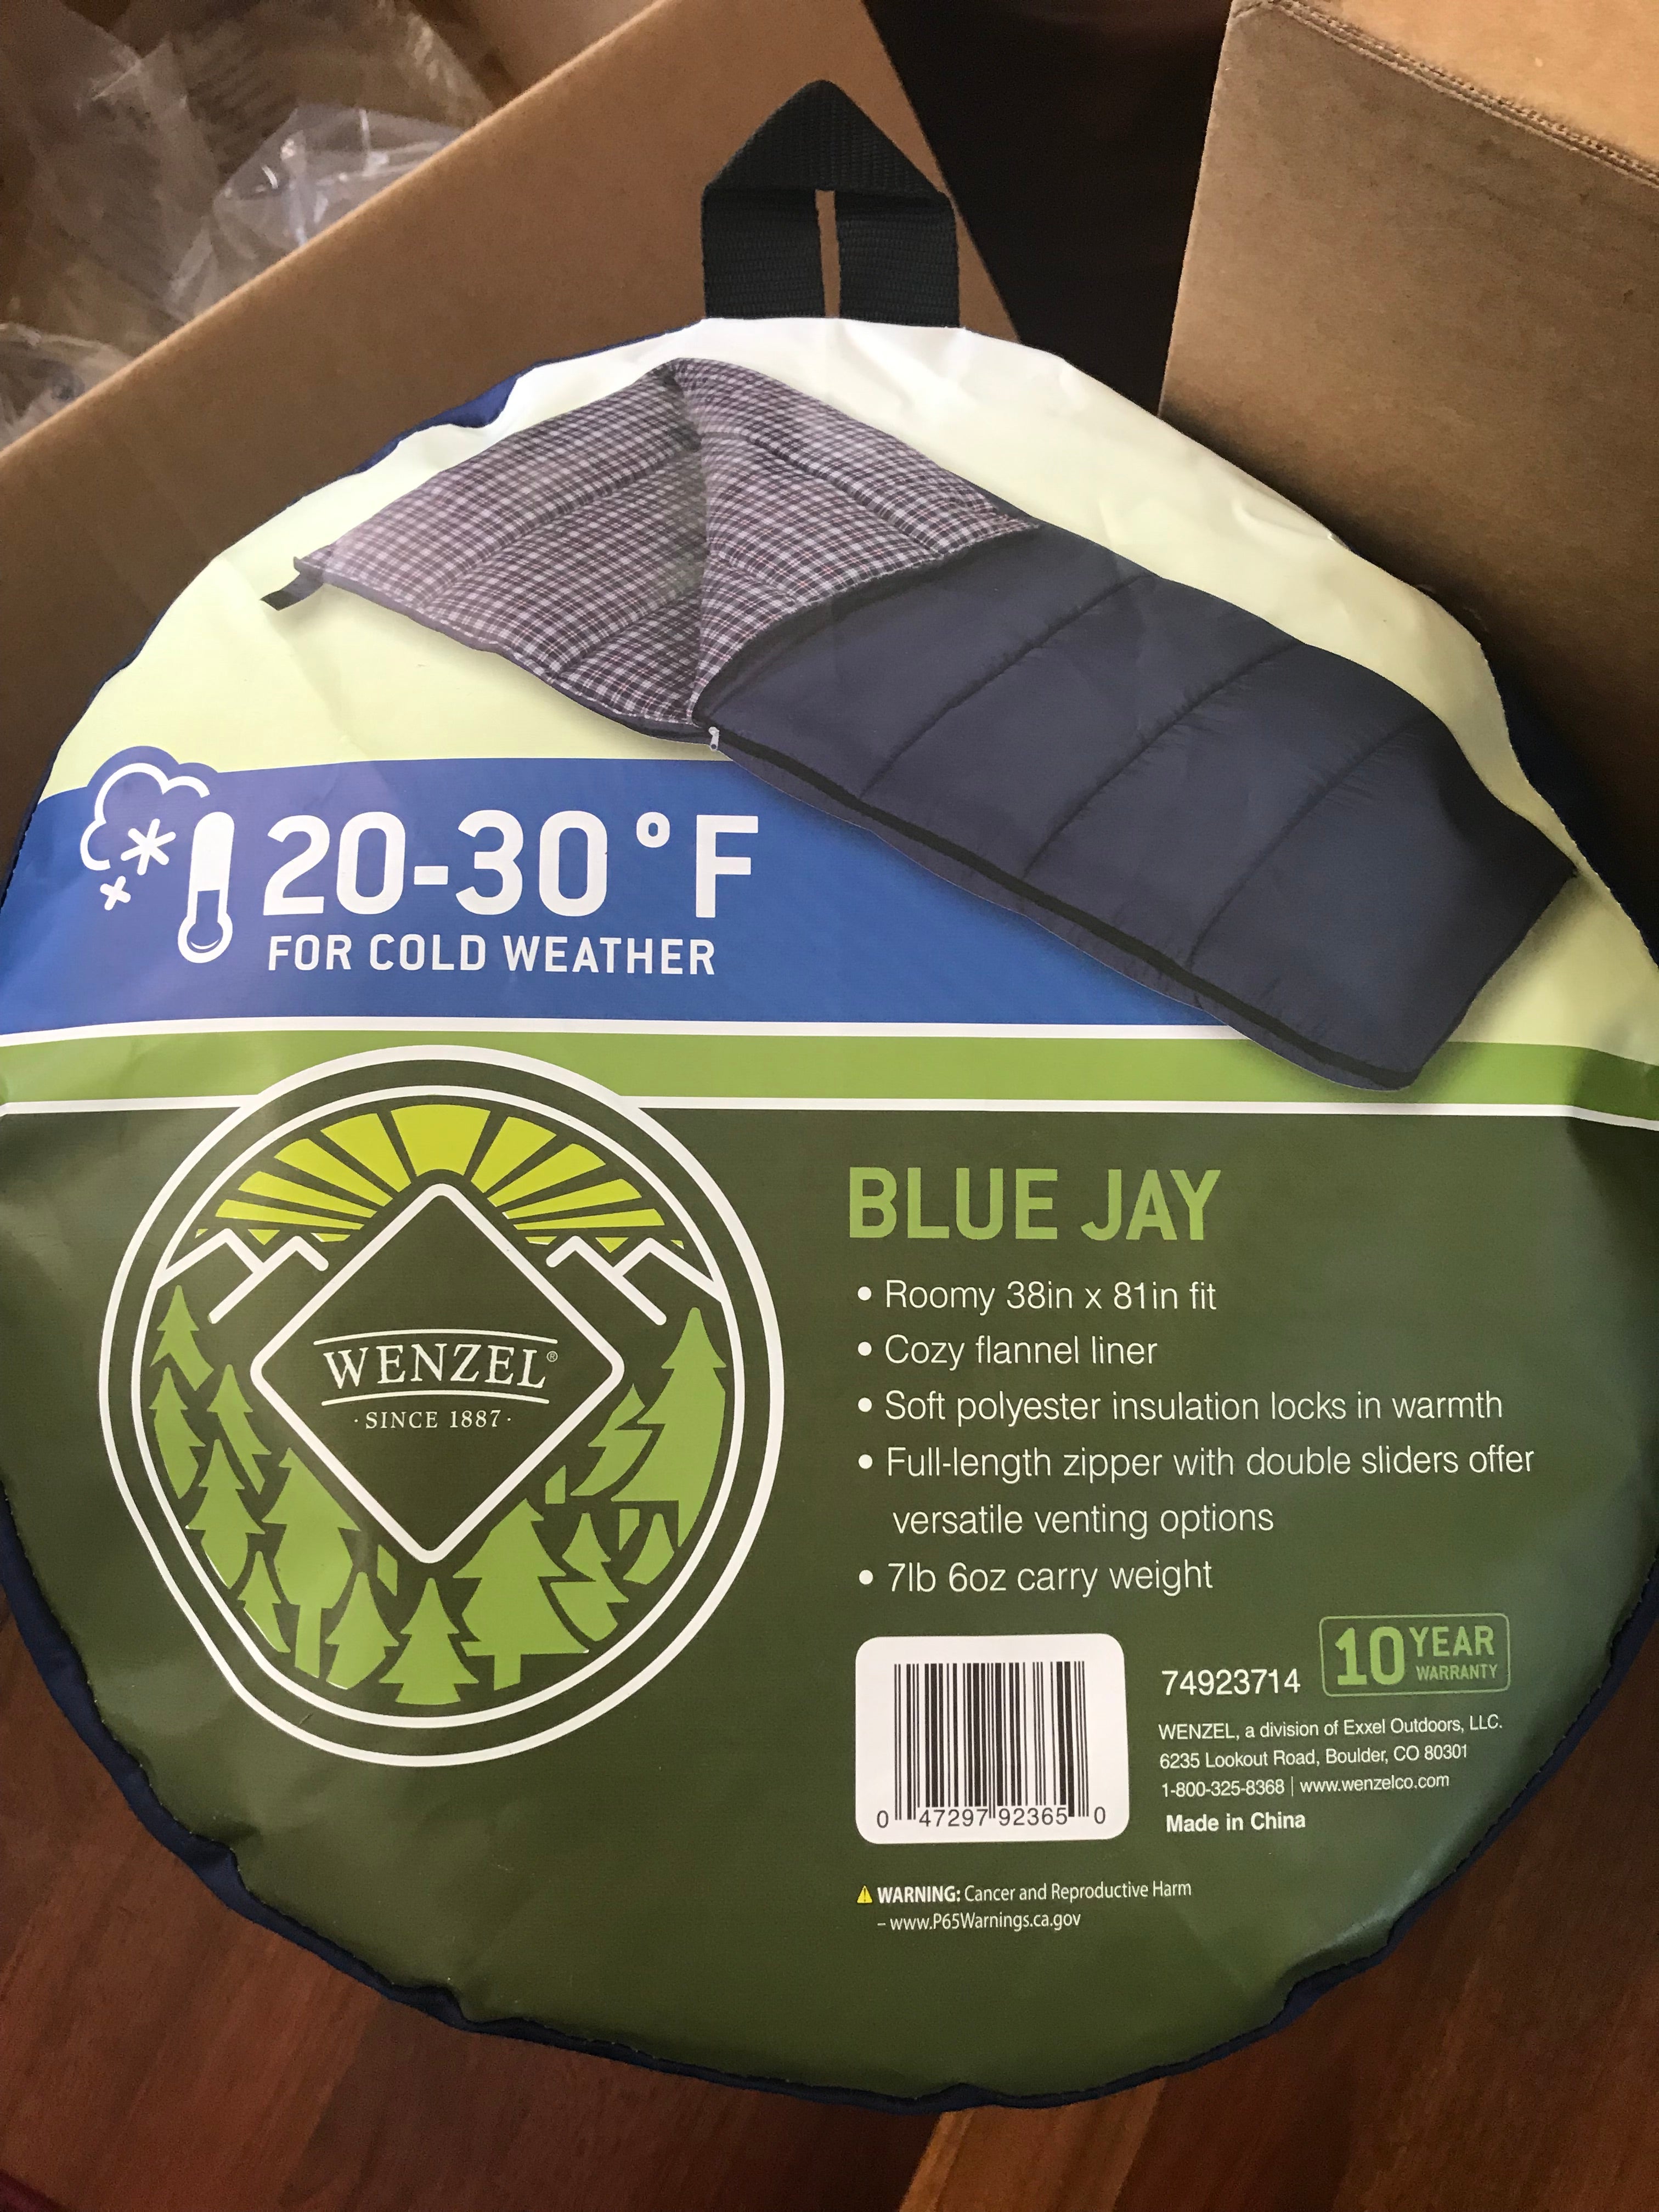 https://wenzelco.com/blue-jay-25/  Wenzel Blue Jay 25 degree sleeping bag. Comfortable, warm, well made and economical.